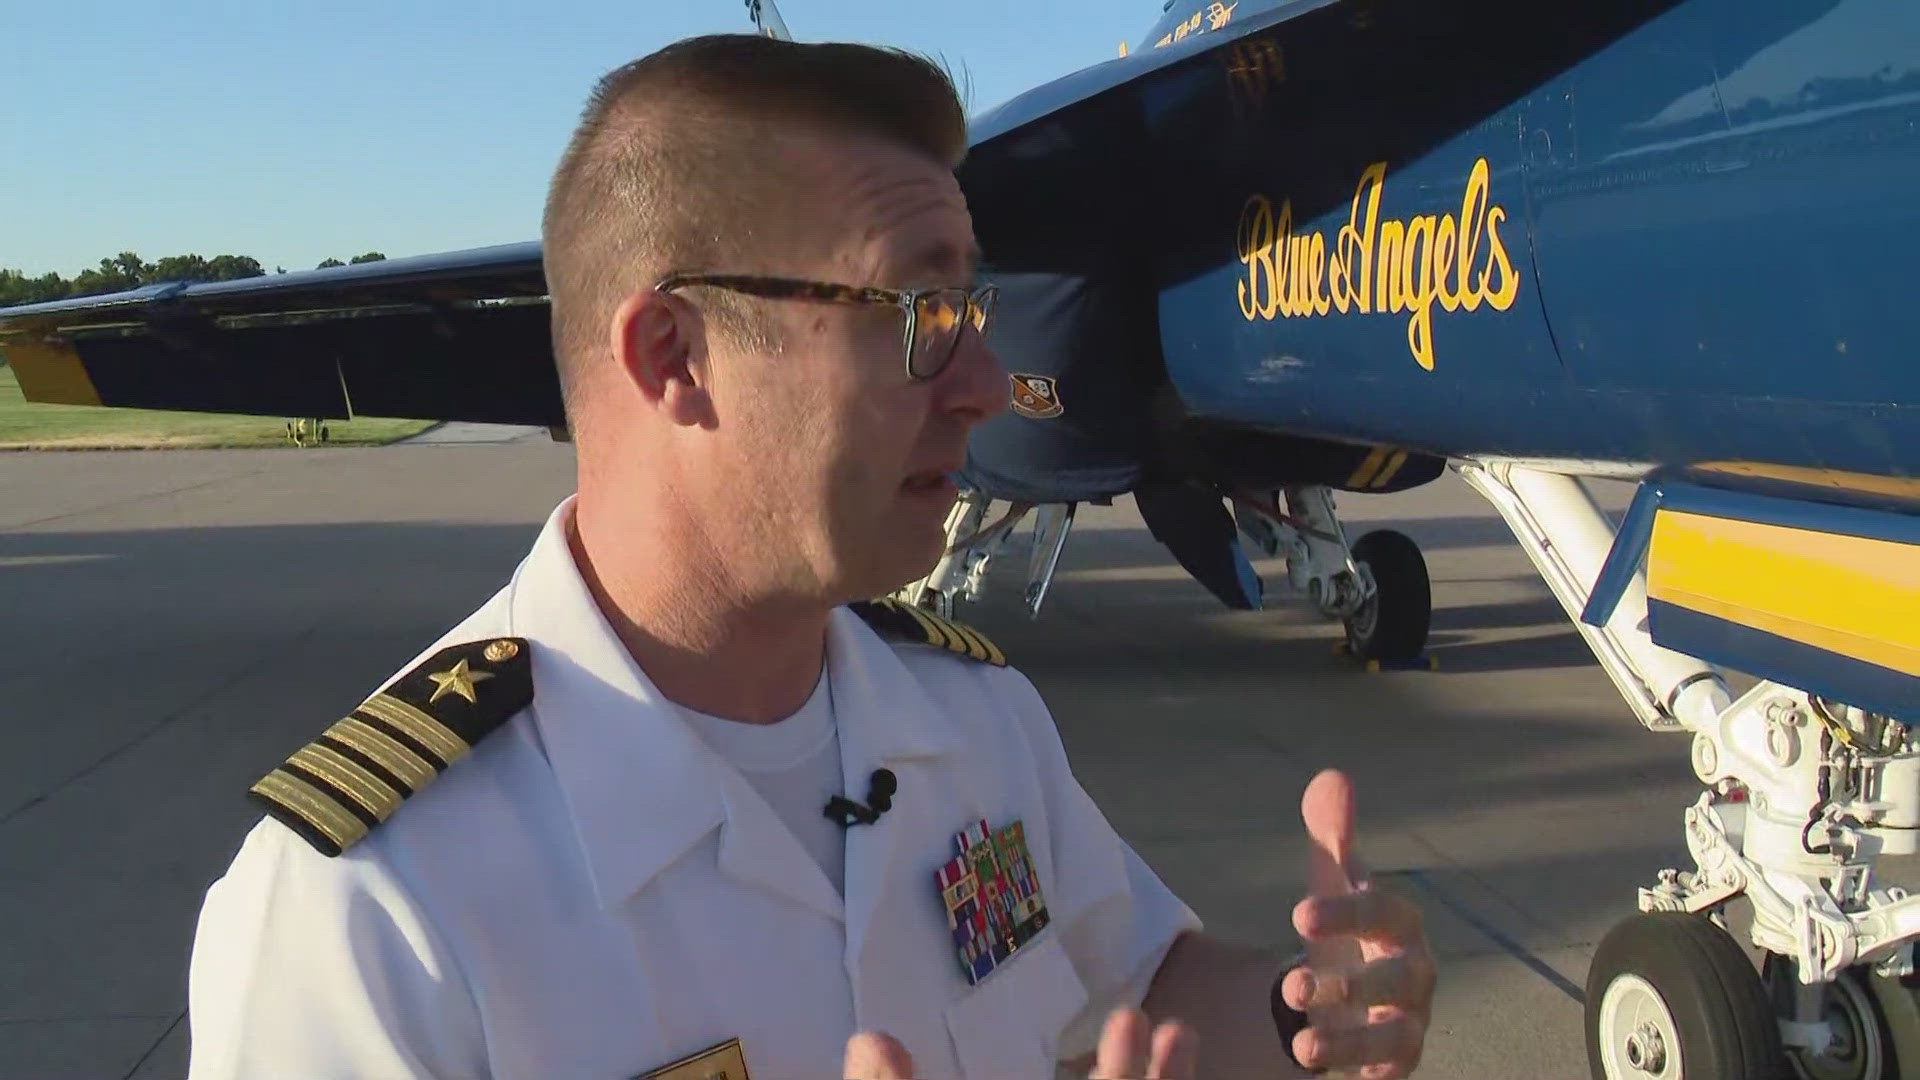 The Blue Angels return to the skies above Chesterfield this weekend, June 8-9. Here's how to watch it.